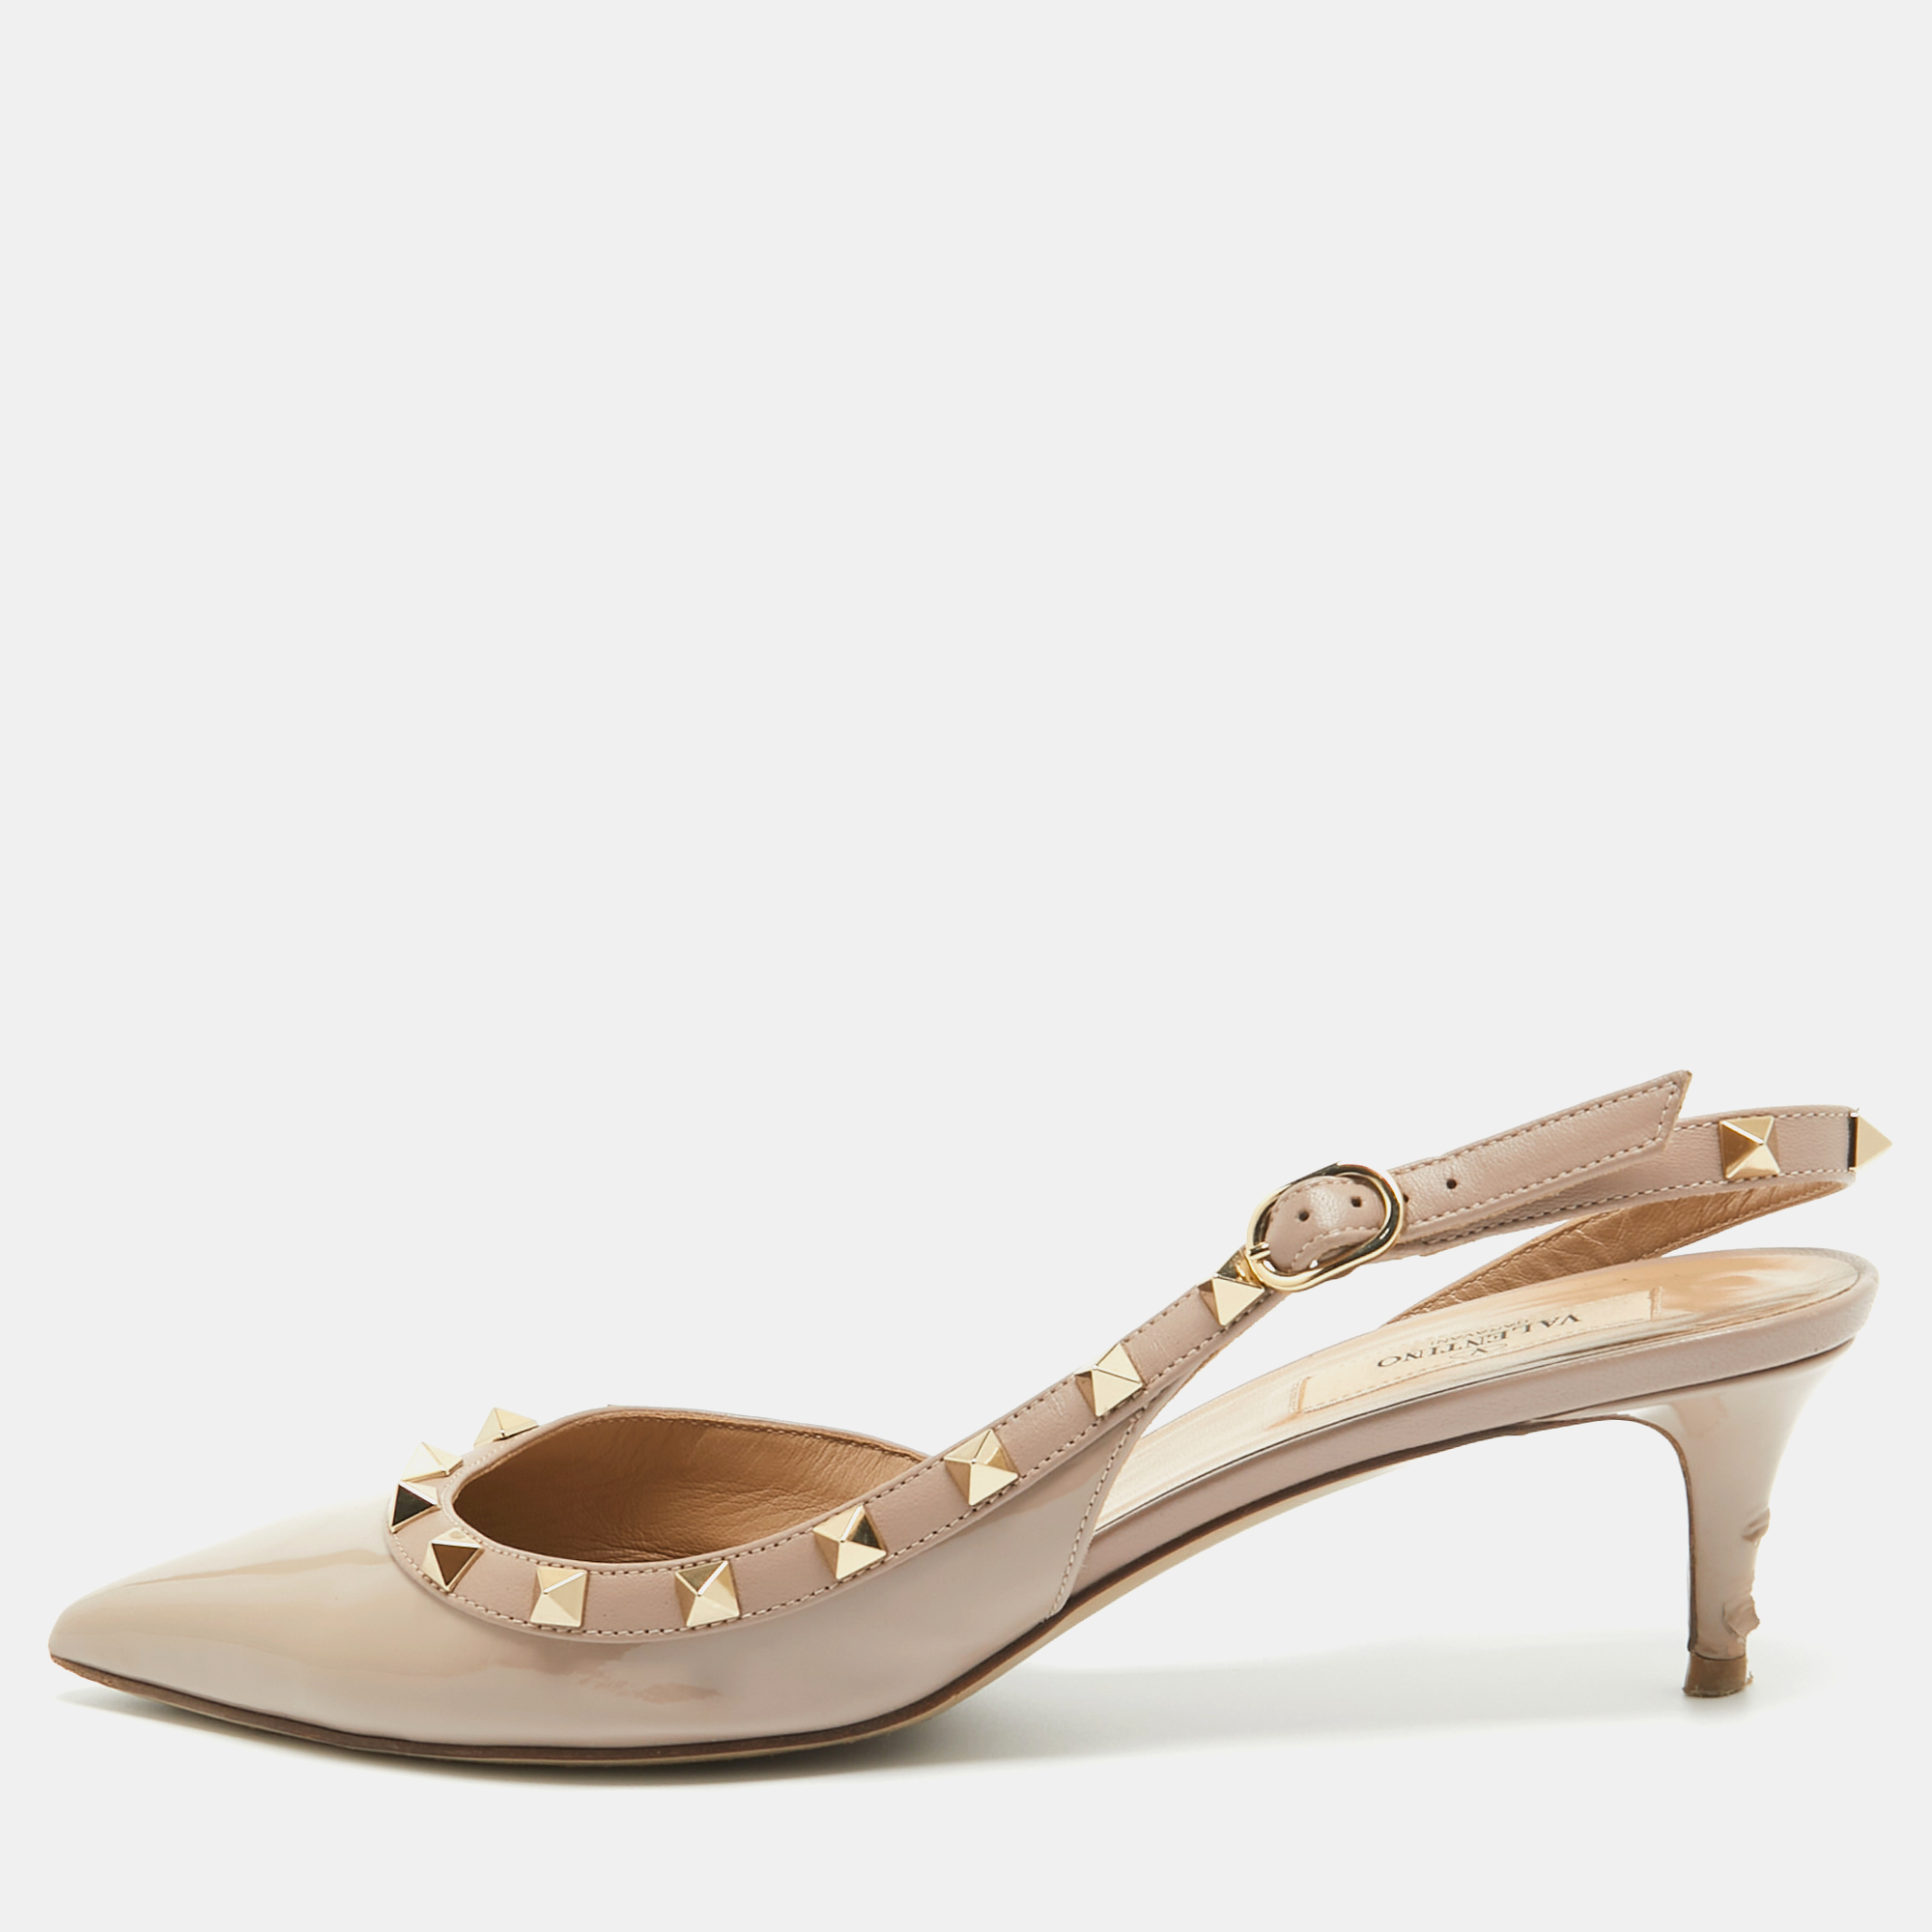 Pre-owned Valentino Garavani Beige Patent And Leather Rockstud Slingback Pumps Size 40